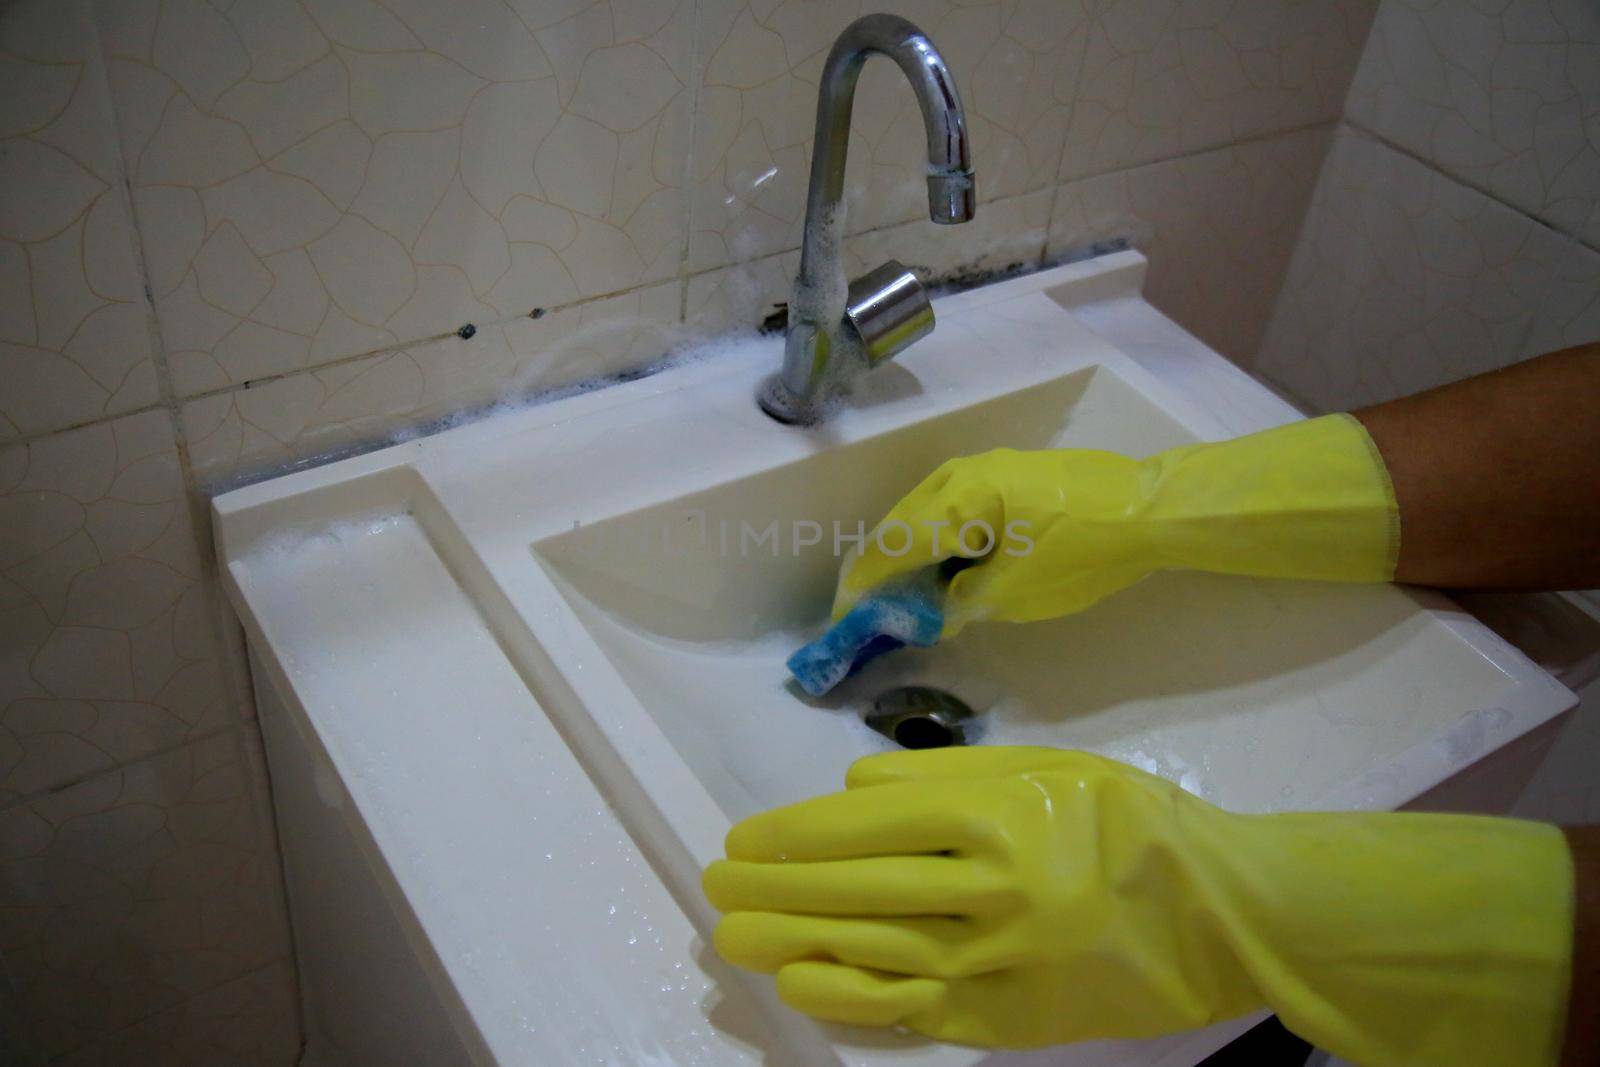 rubber glove for household cleaning by joasouza